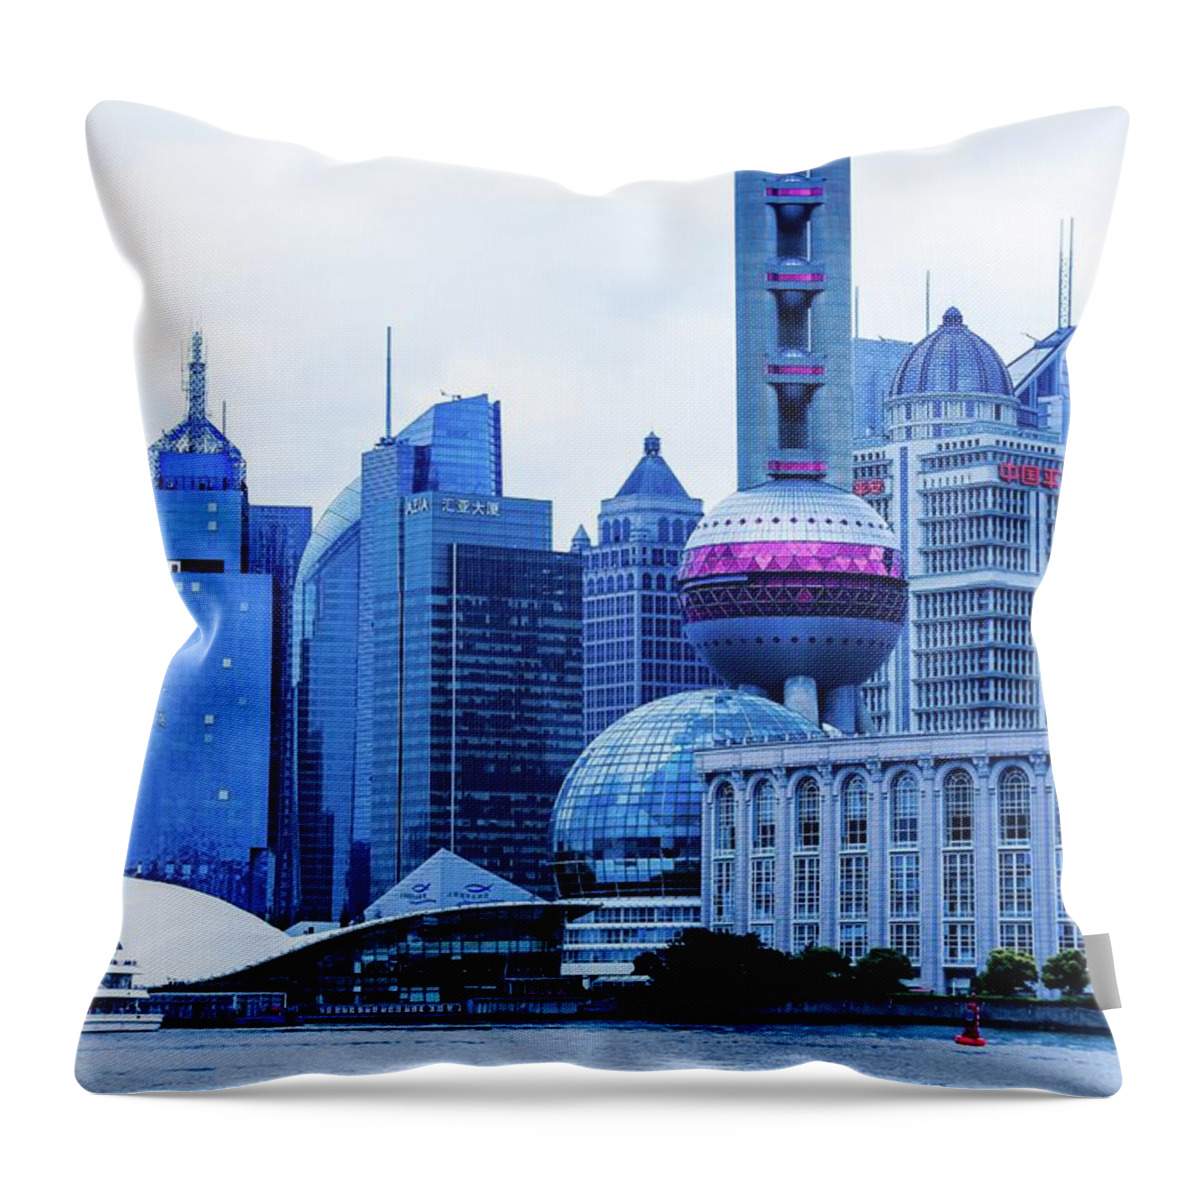 Pudong Throw Pillow featuring the photograph Pudong Shanghai Chinese Restaurant Decoration by Josu Ozkaritz